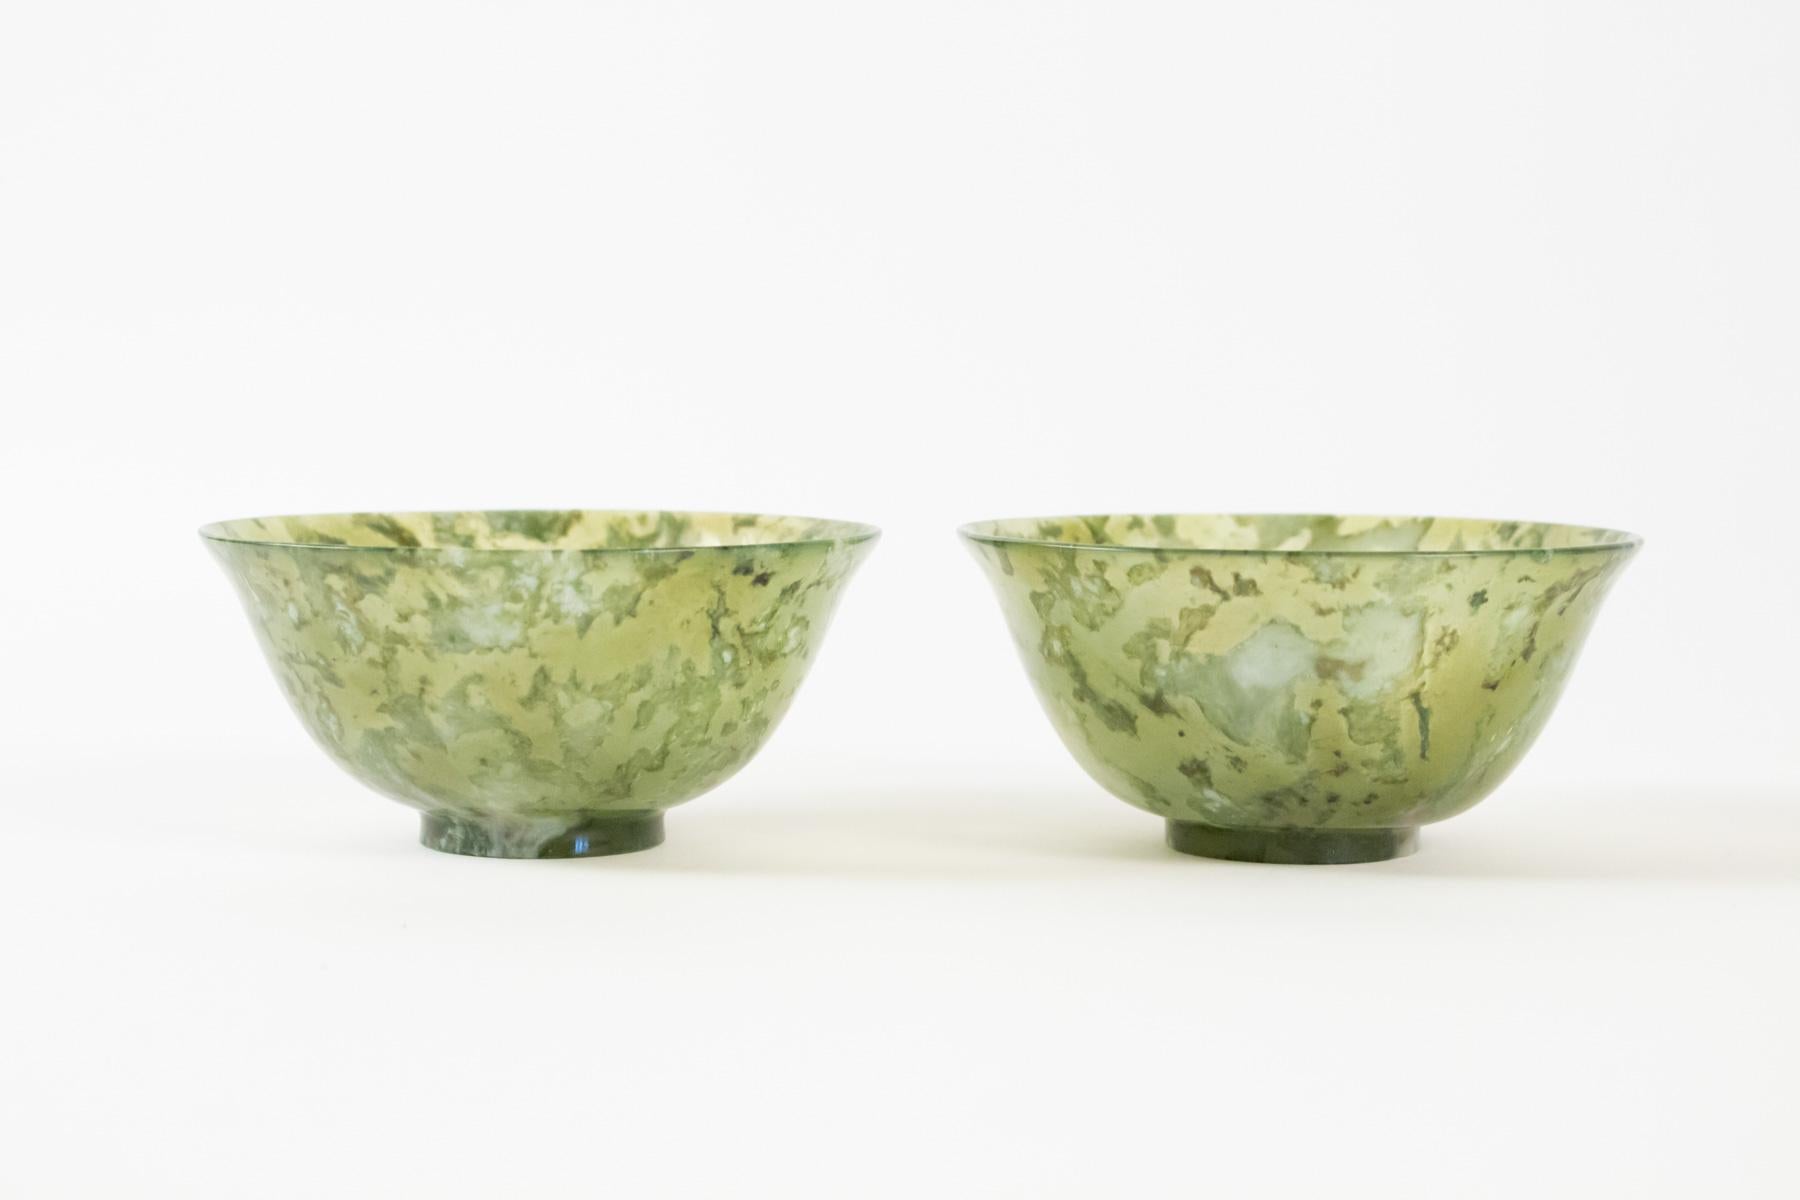 Pair of Bowenite Cups, Asian Art, Antiquity, Mid 20th Century, China 1